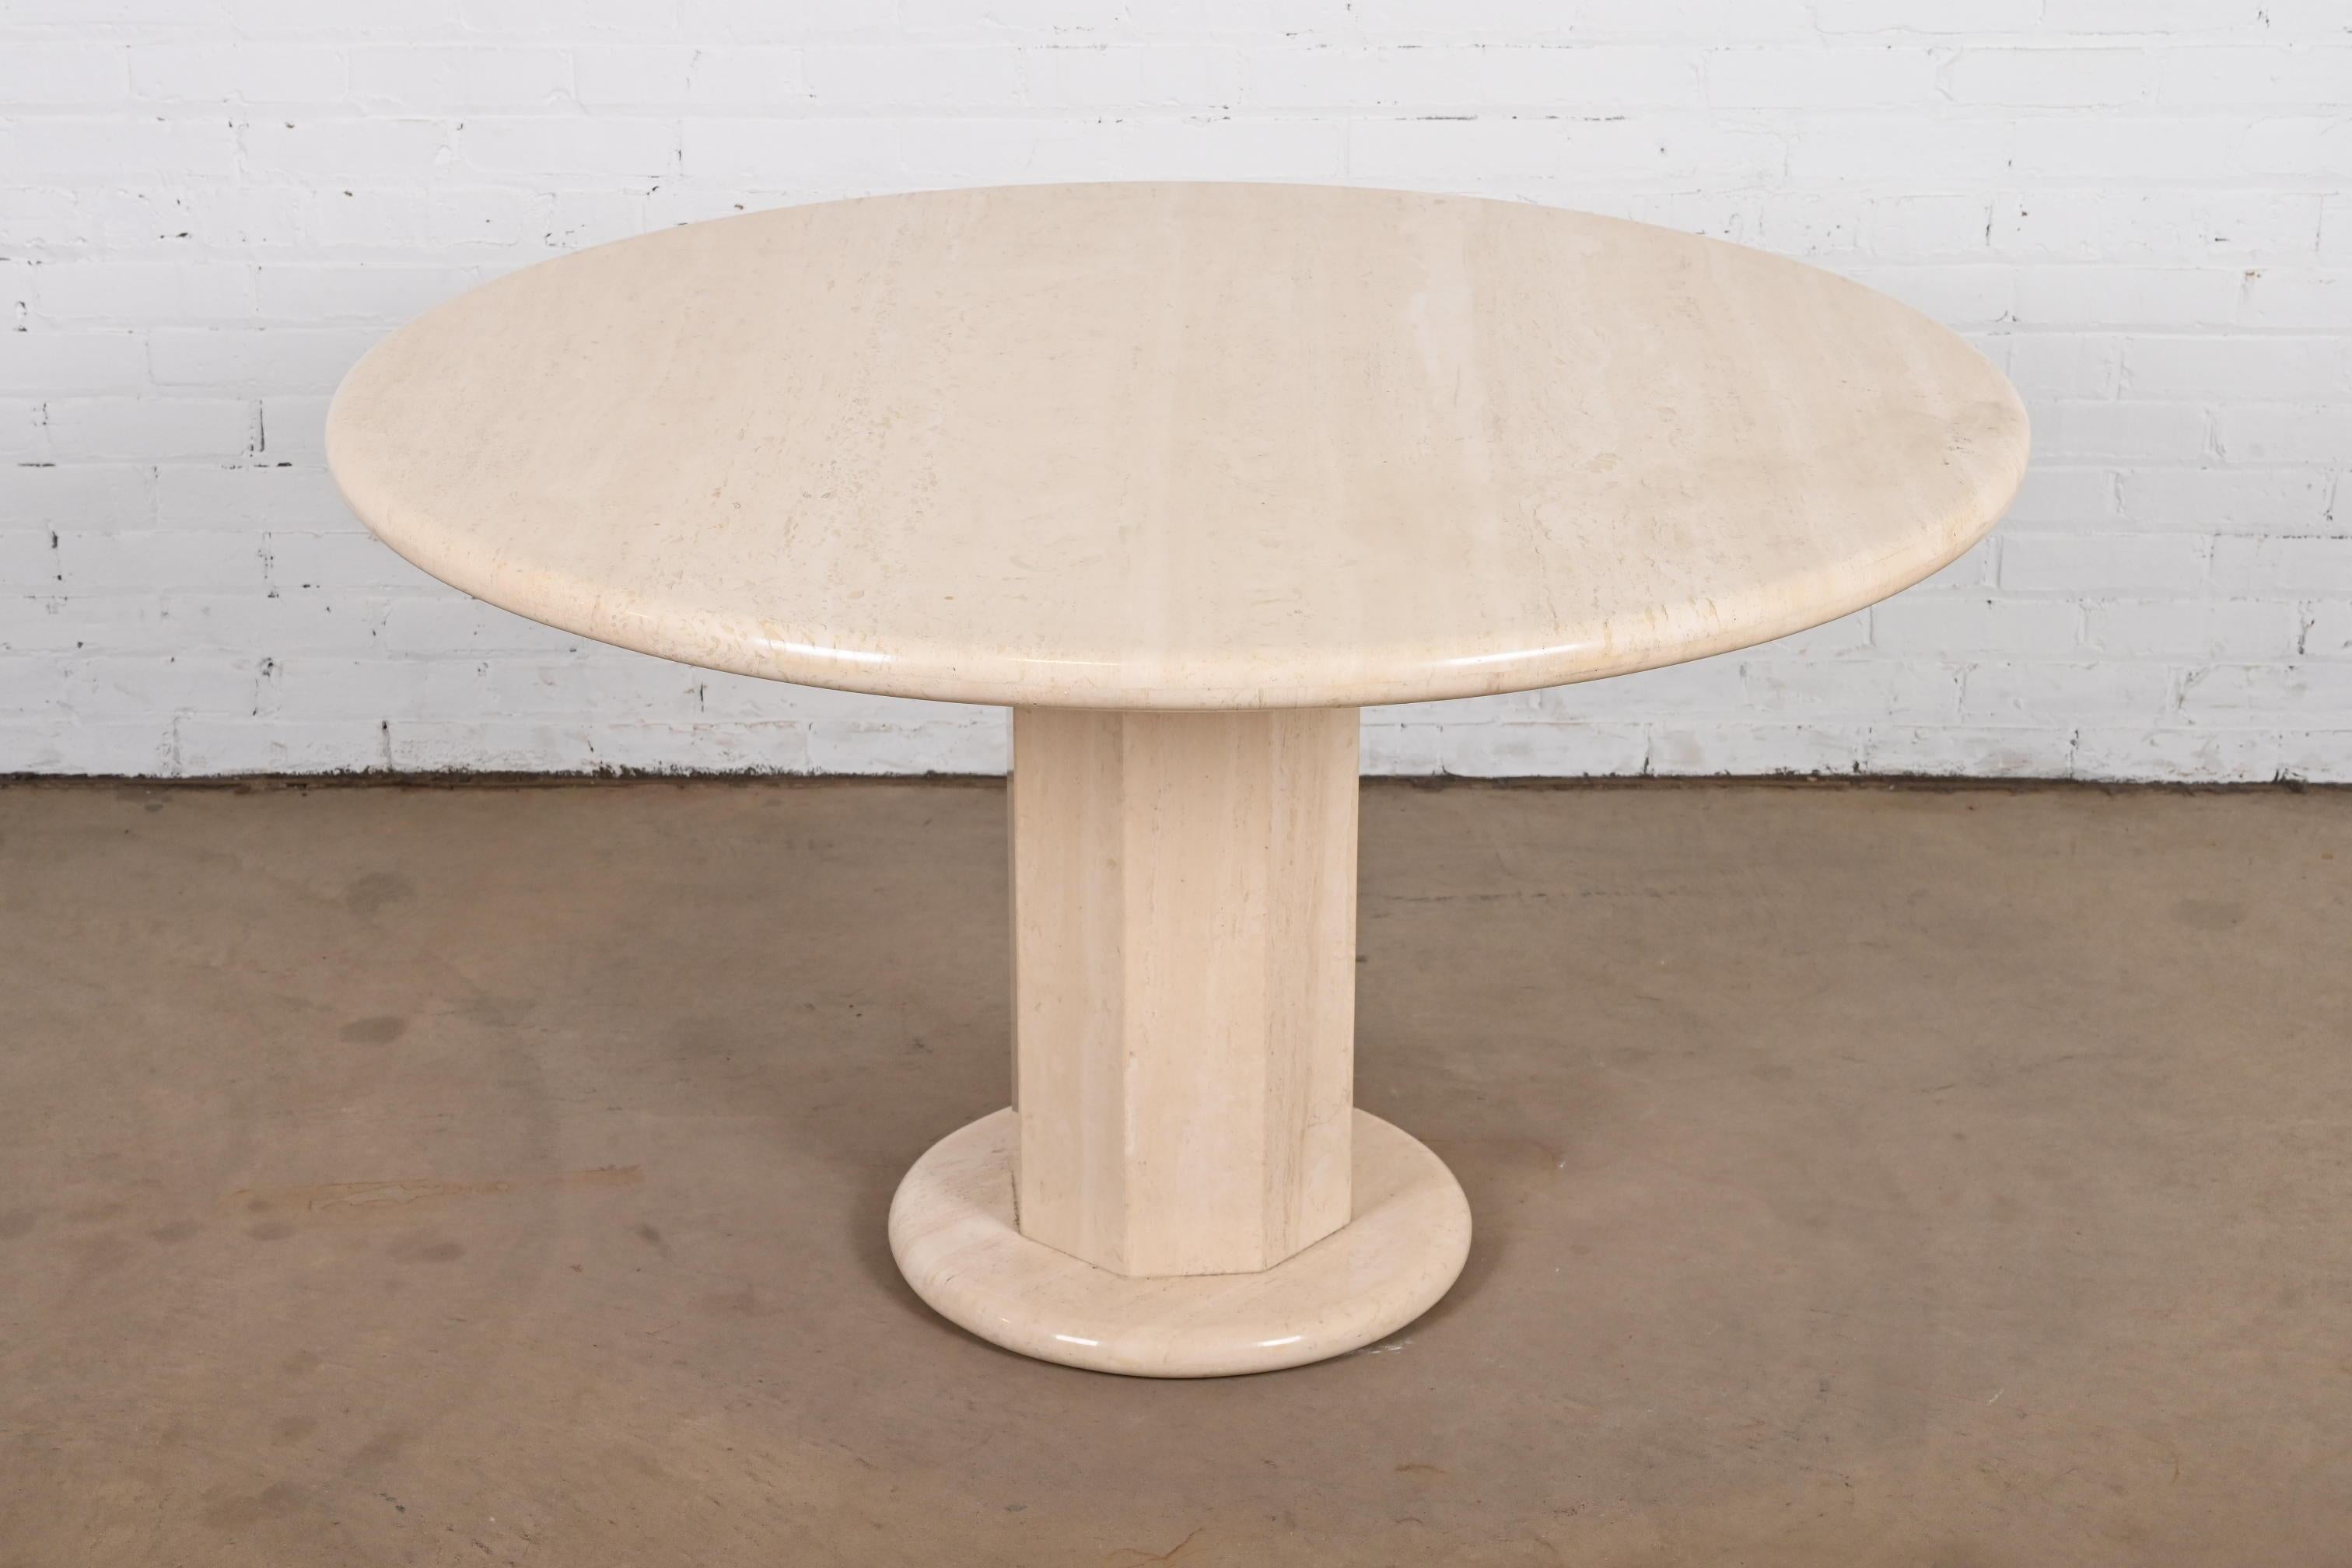 Modern Italian Travertine Round Pedestal Dining or Center Table by Ello, 1970s For Sale 8